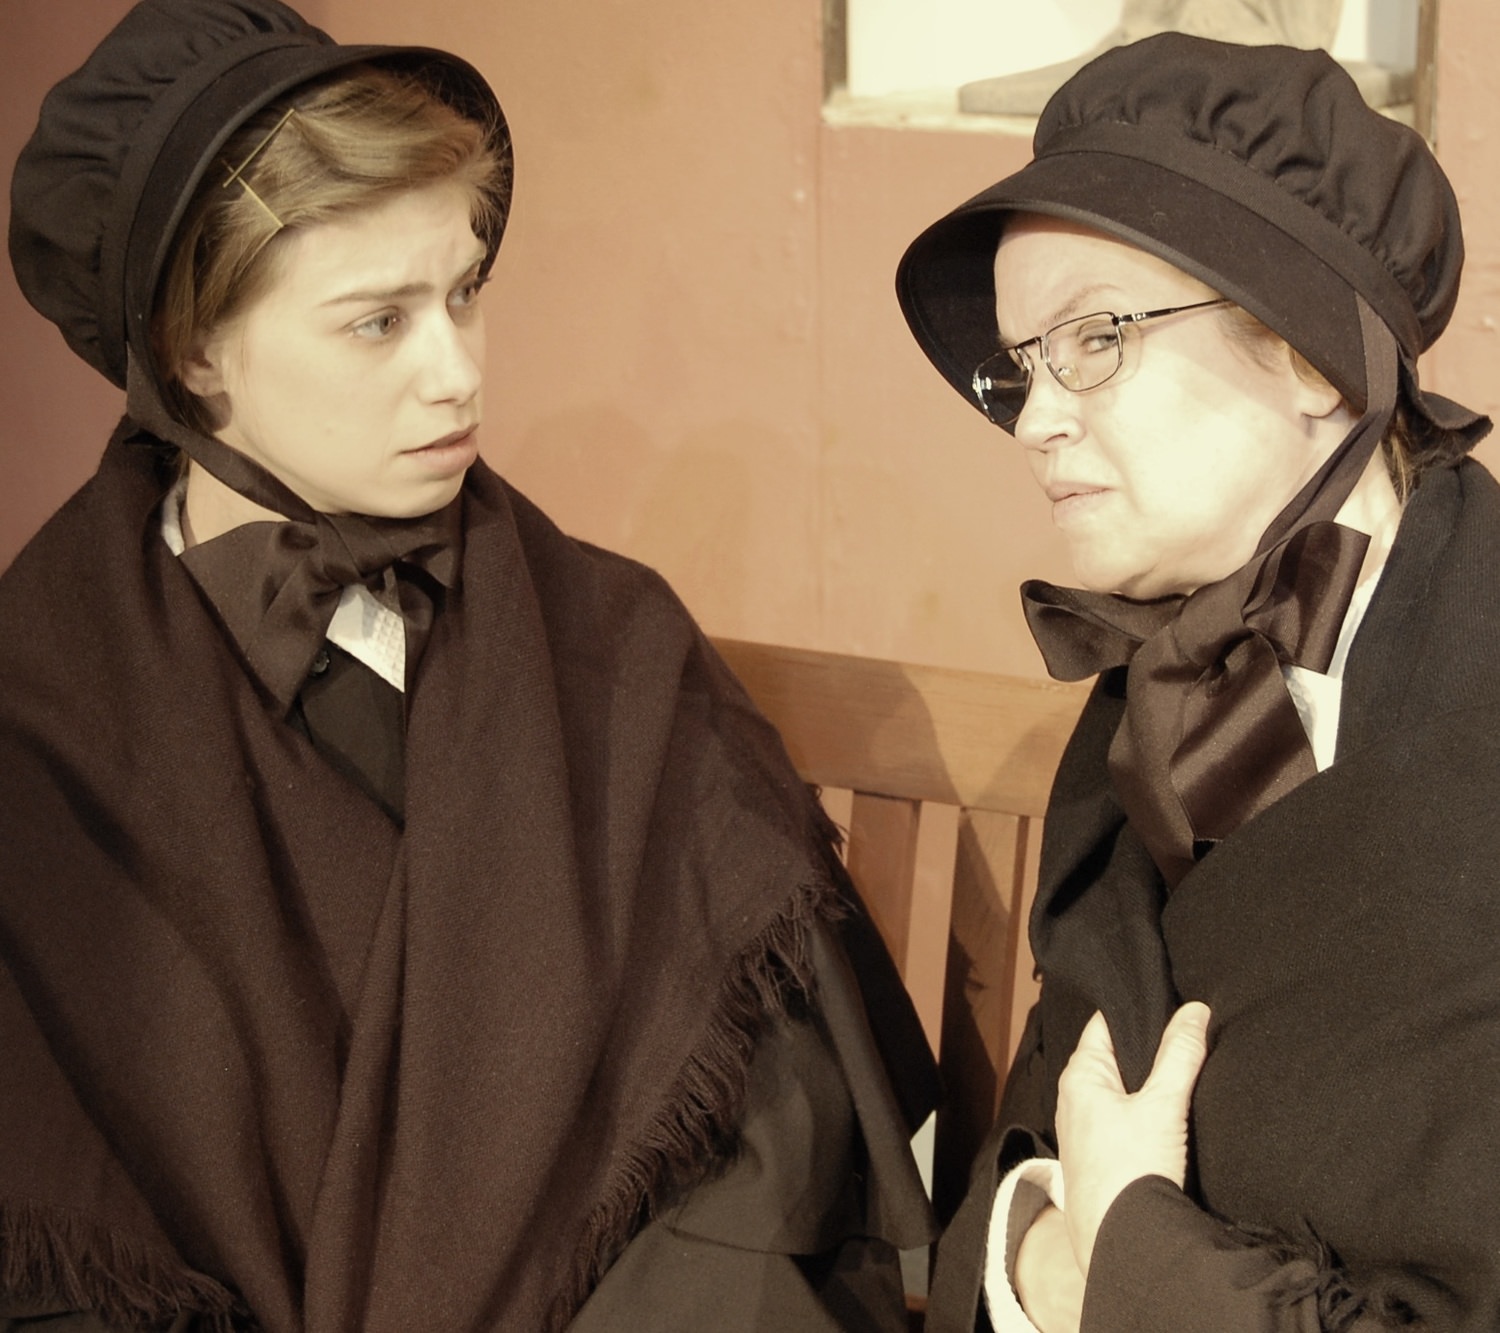 The stern Sister Aloysius (Joyce McGookey of Royal Oak pictured R) questions the young nun; Sister James (Erica Shubin of Ypsilanti) (L) in Doubt, a Parable.
1